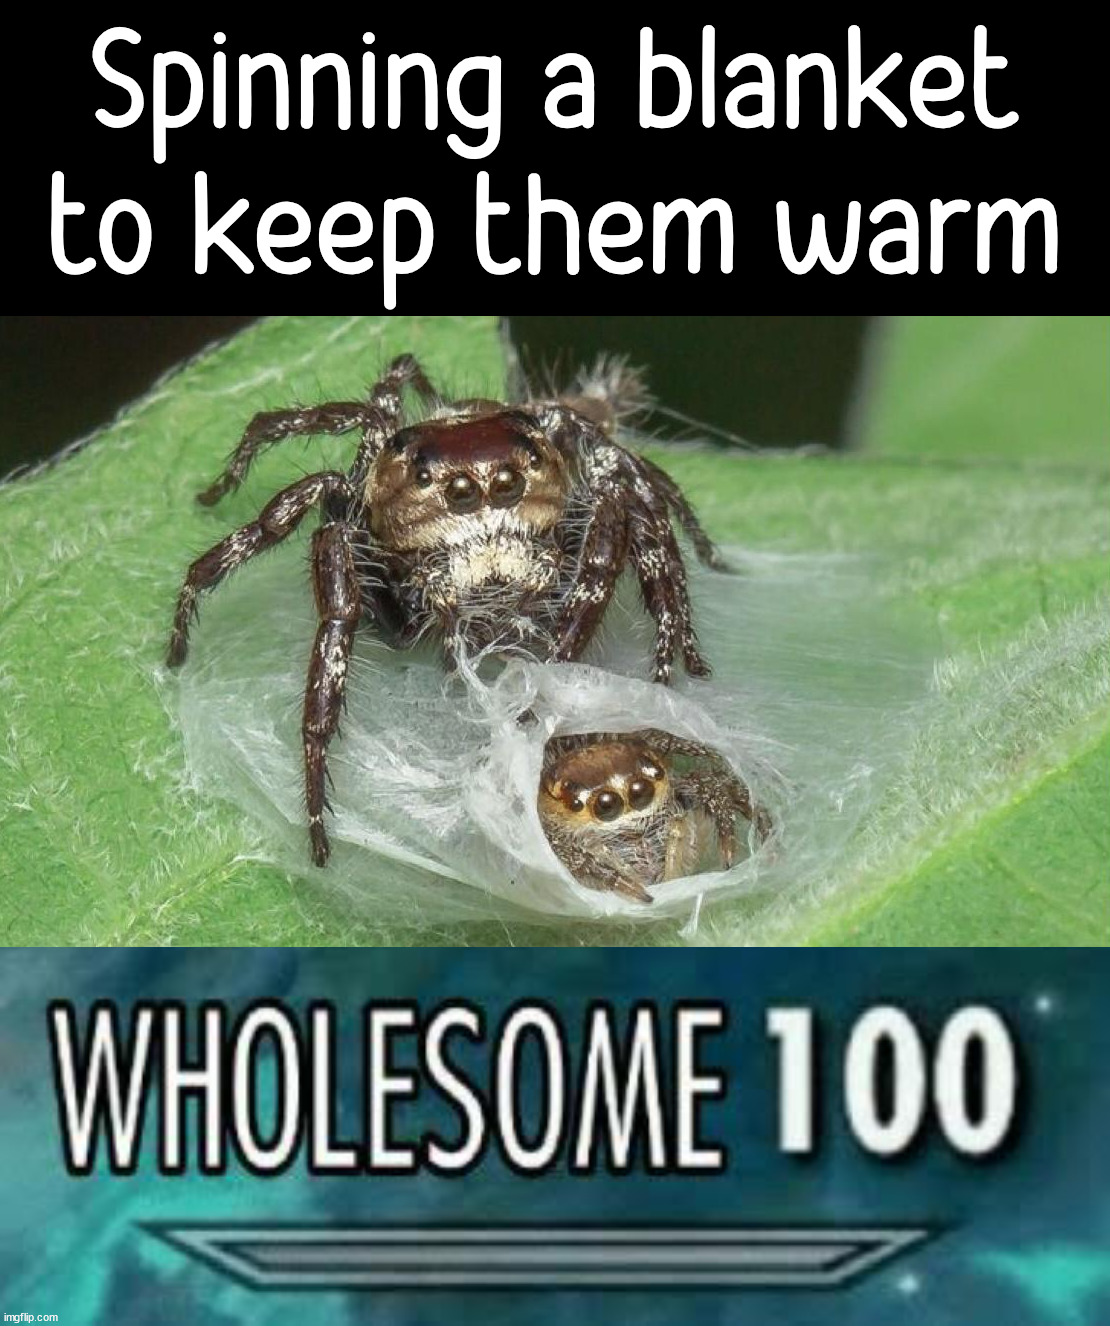 Spinning a web blanket because they are cold |  Spinning a blanket to keep them warm | image tagged in wholesome 100,spider,blanket,web,cold | made w/ Imgflip meme maker